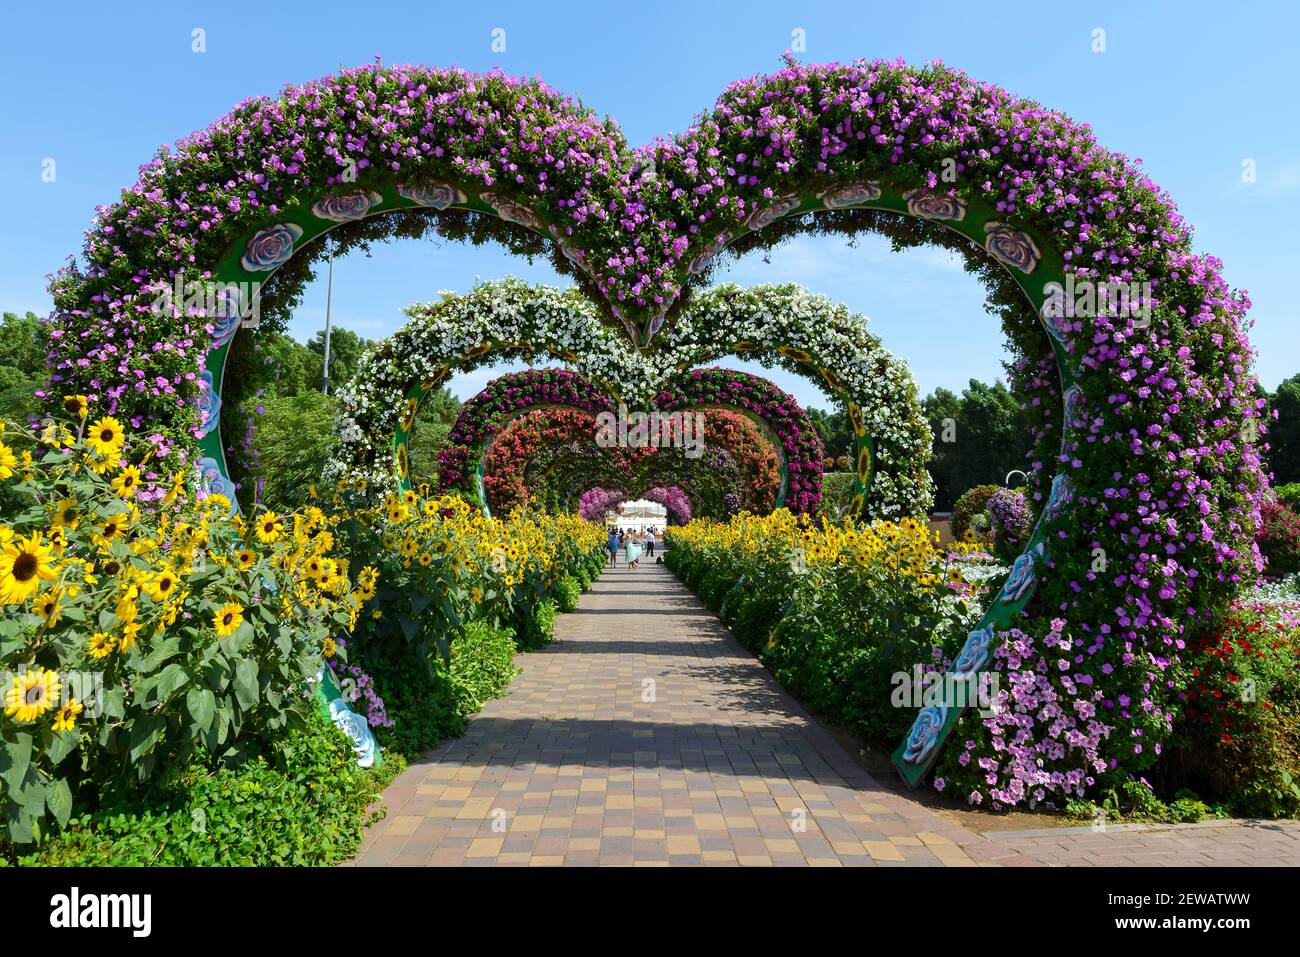 Flower Hearts Passage at Dubai Miracle Garden, a passageway of flowers located in Dubailand, Dubai, United Arab Emirates. Heart shaped flowers tunnel. Stock Photo